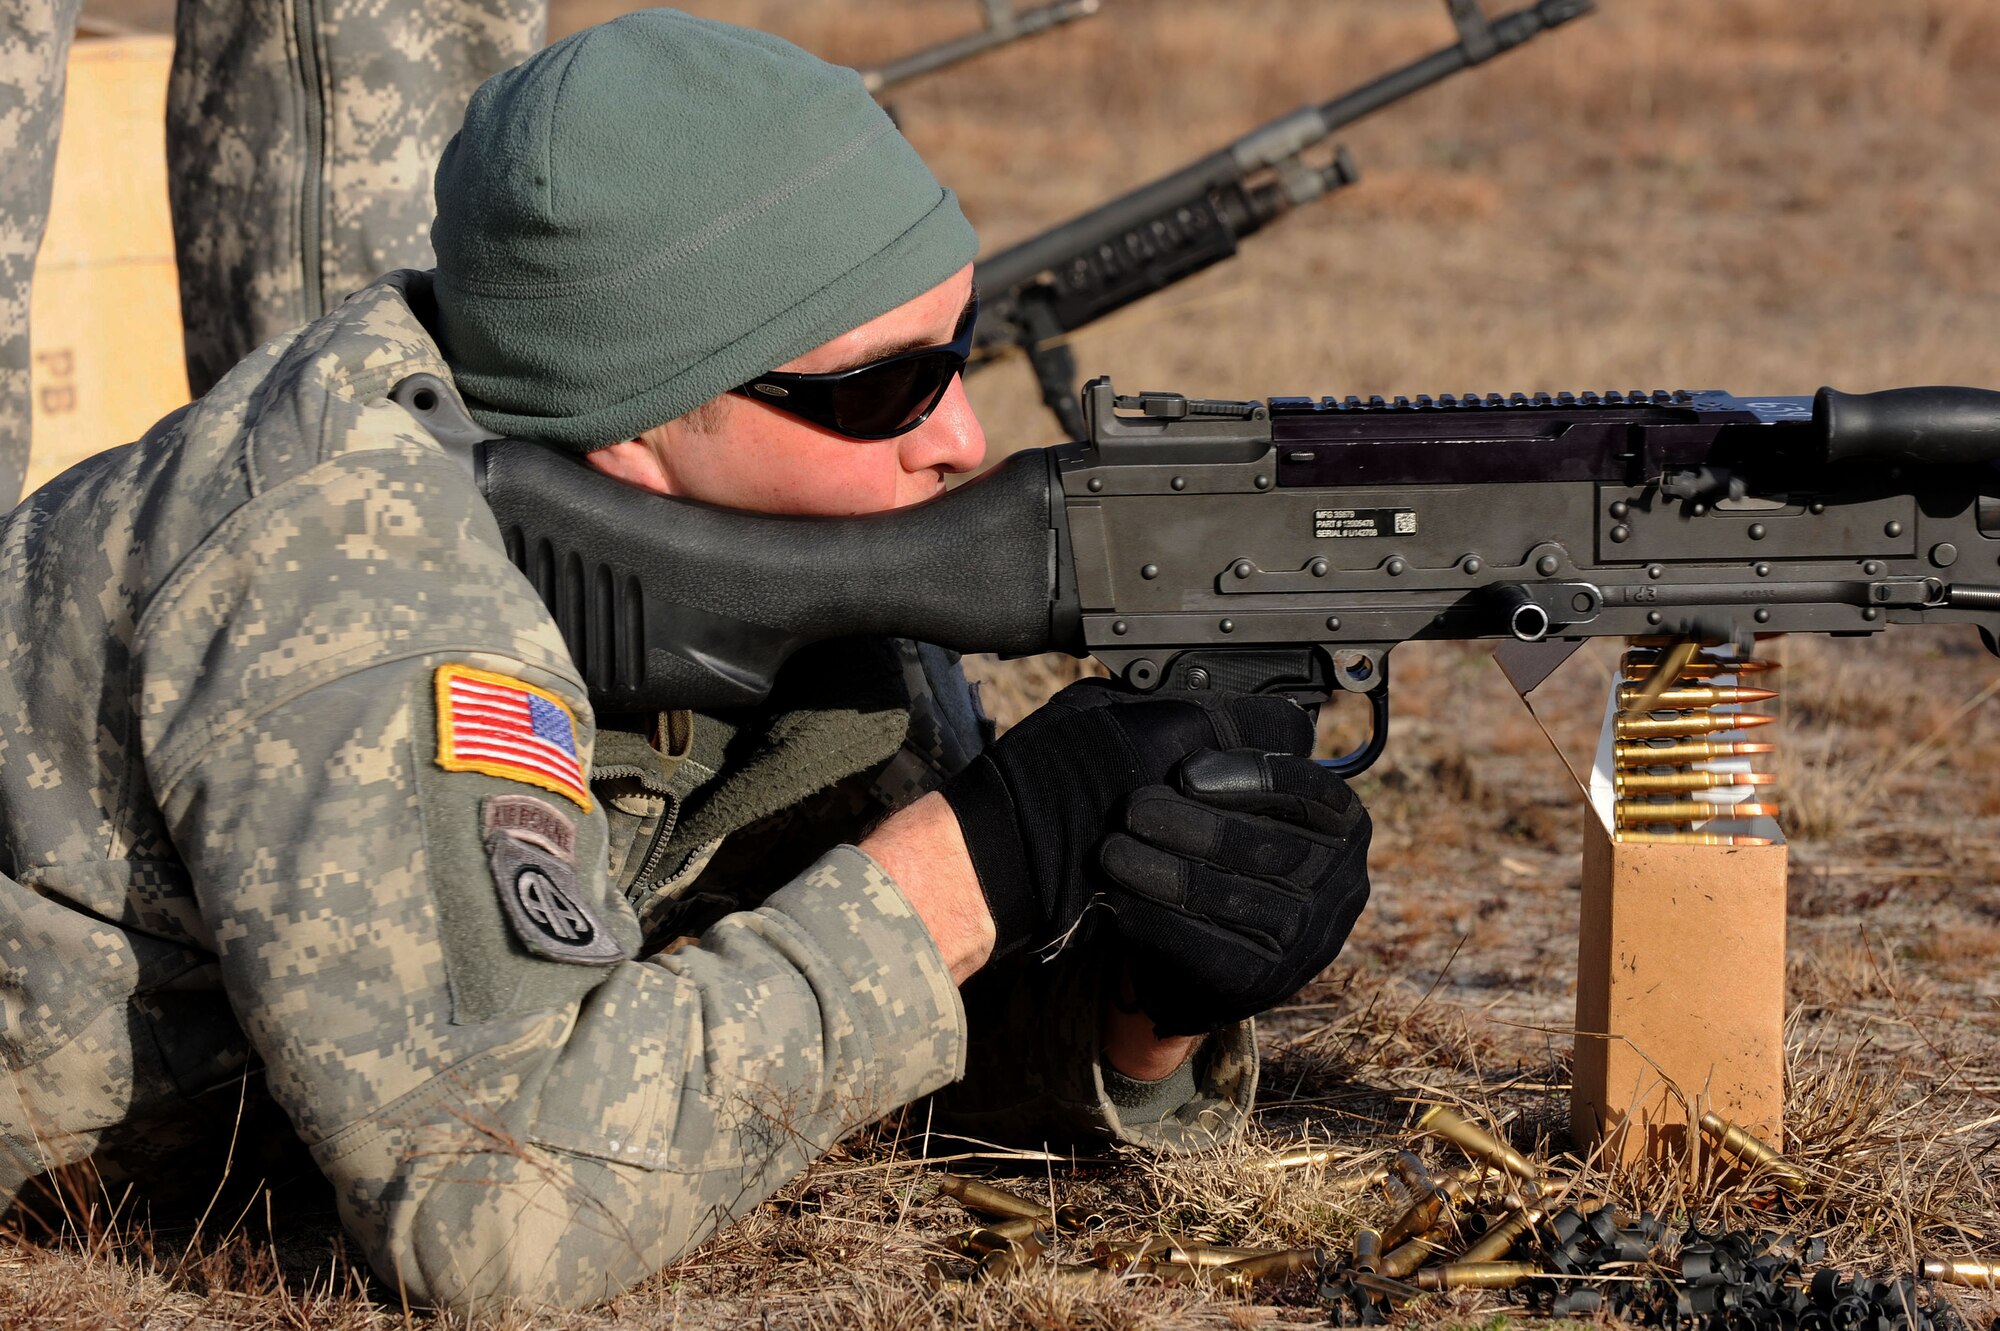 A U.S. Army National Guard soldier assigned to the 1st Battalion, 169th Aviation Regiment, Ft. Bragg, N.C., shoots an M240 machine gun at Poinsett Electronic Combat Range, Sumter, S.C., Feb. 6, 2015. Poinsett Range provides electronic warfare training, munition training, Tactical Air Control Party training, land navigation training, and survival, evasion, resistance, escape training. (U.S. Air Force photo by Airman 1st Class Michael Cossaboom/Released)